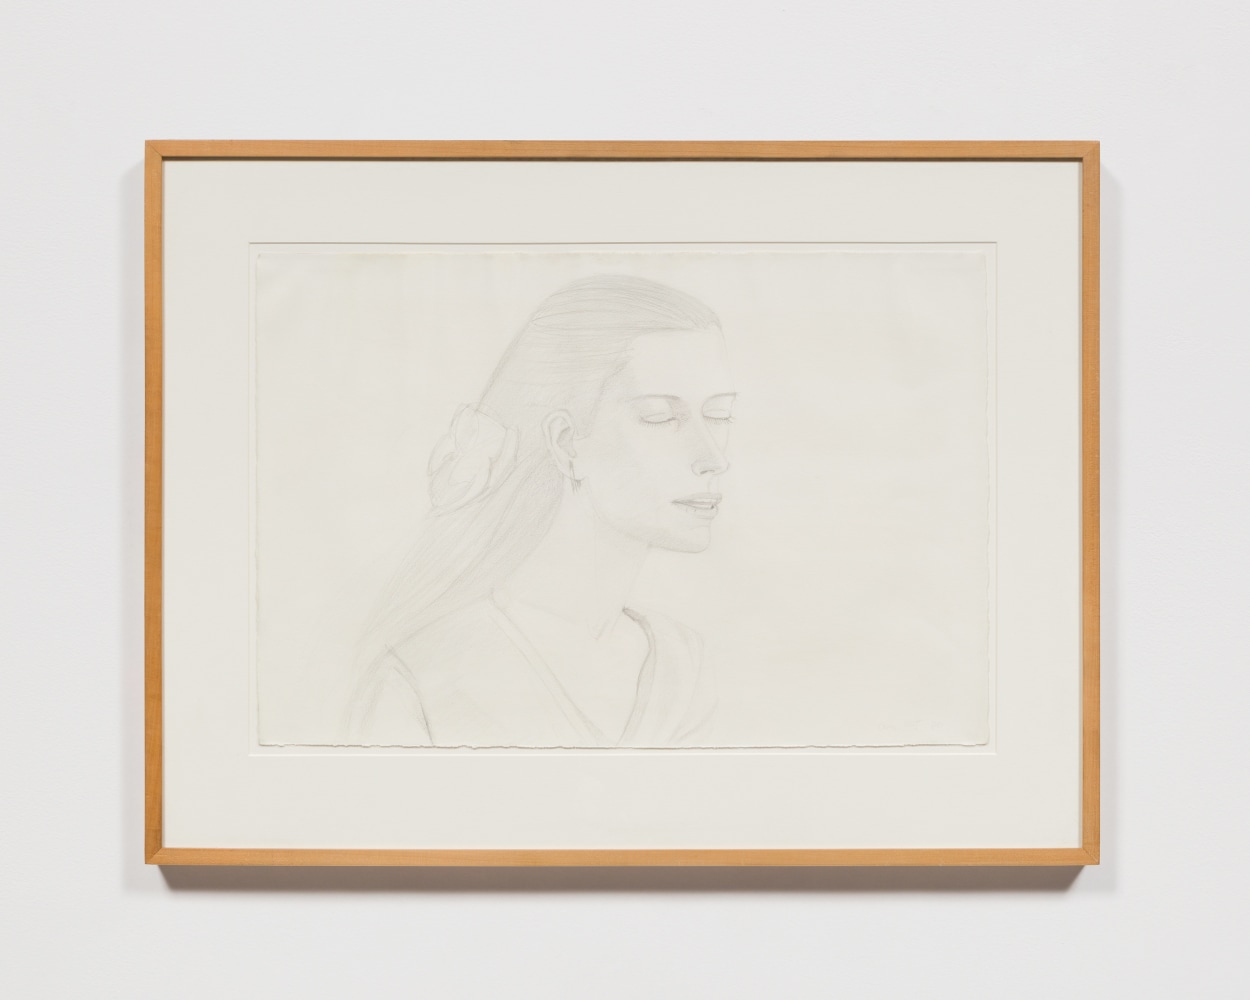 Framed pencil drawing by Alex Katz featuring the side-view of a woman with her eyes closed